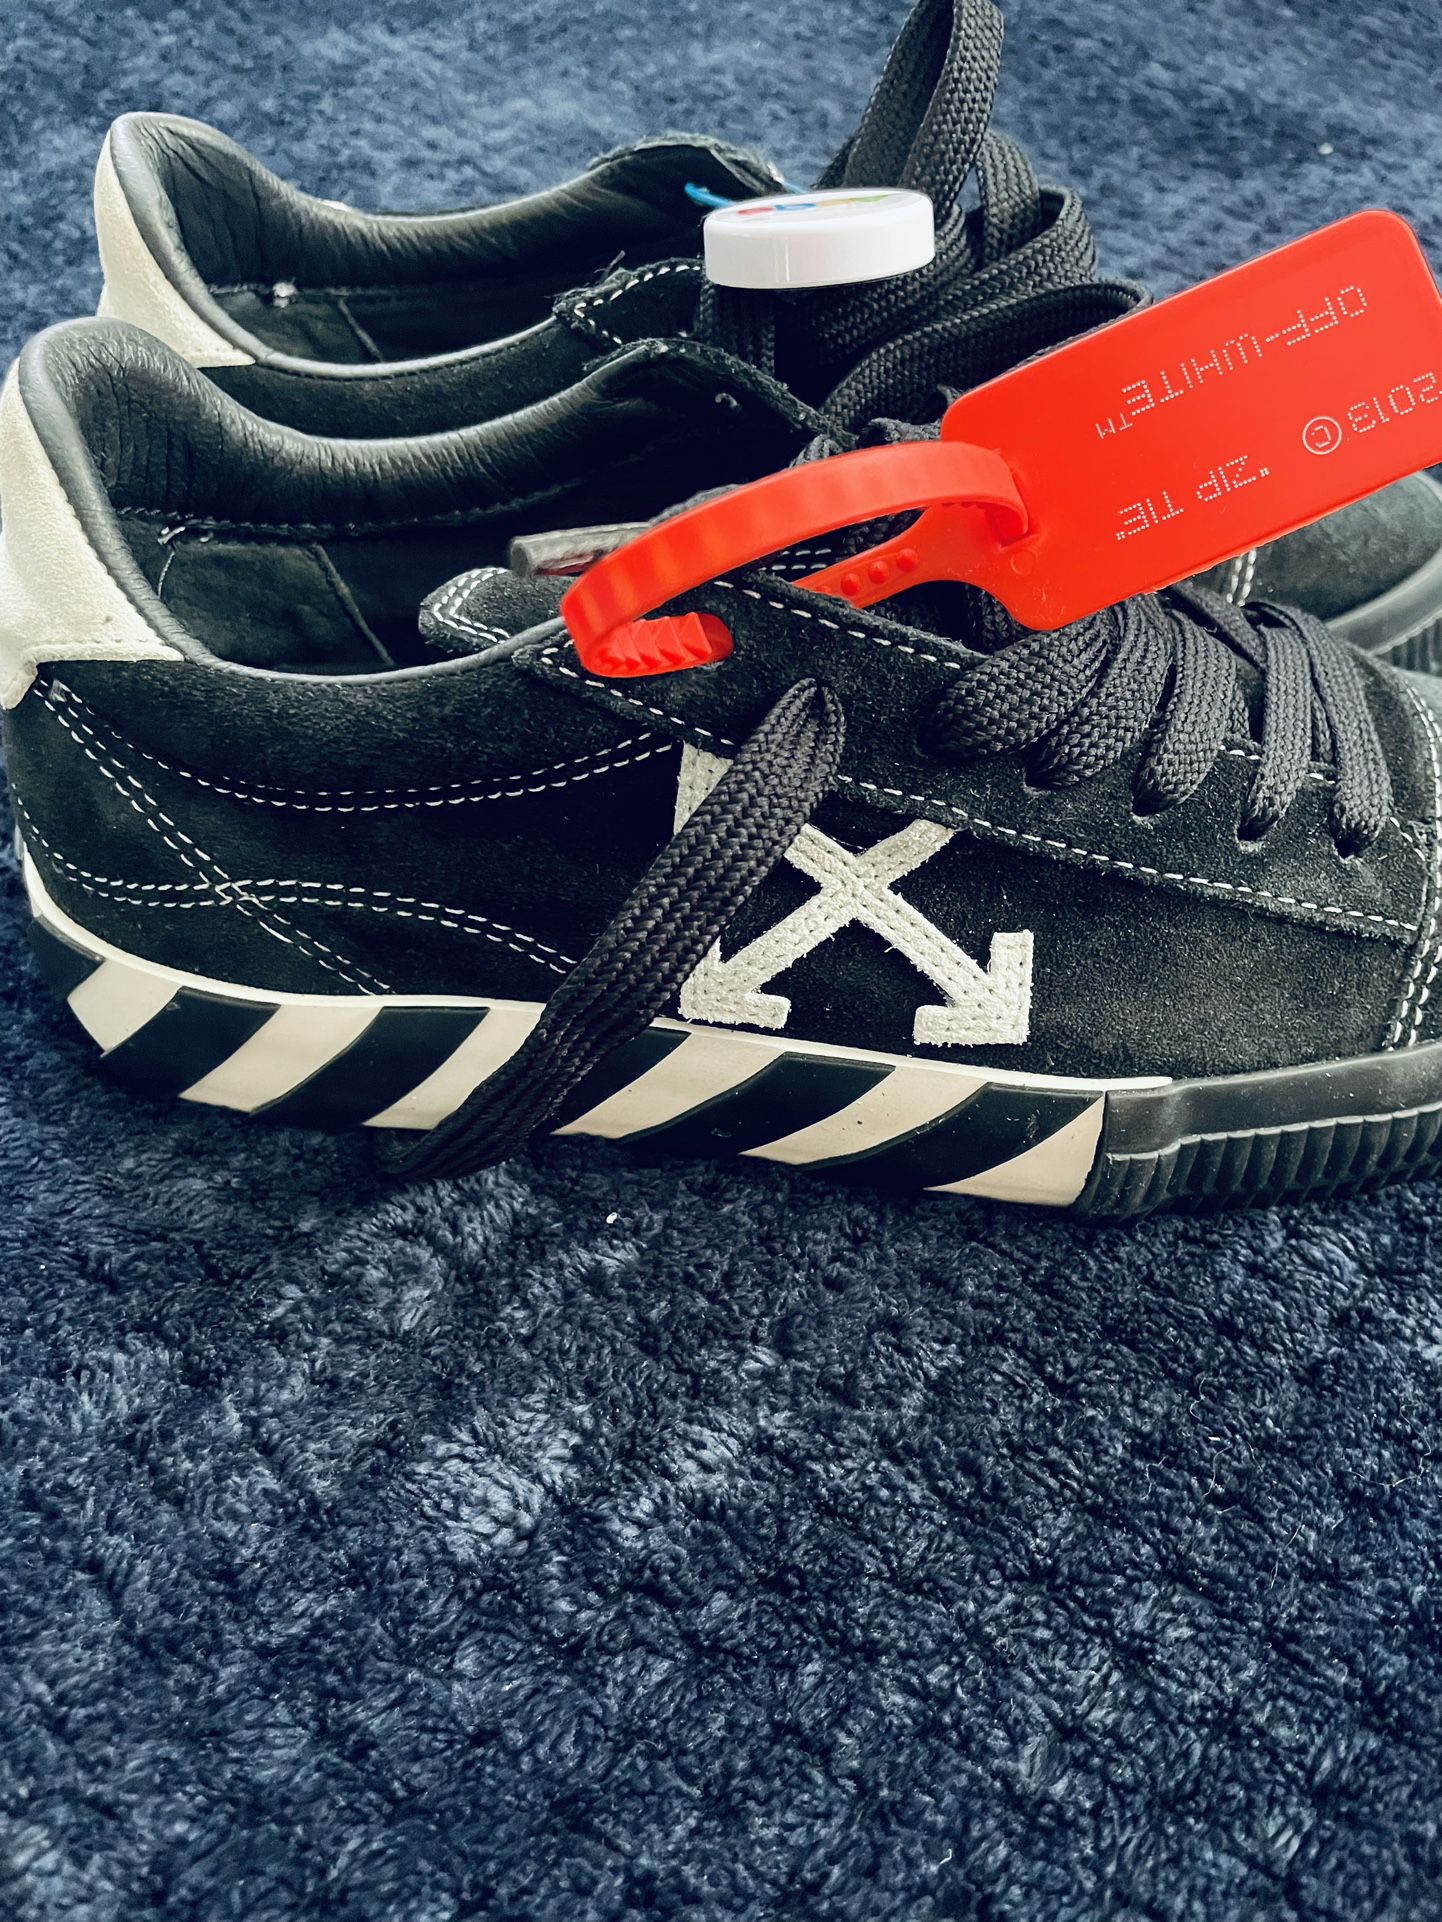 Off White Vulcanized Suede Leather Shoes. Rare Edition 